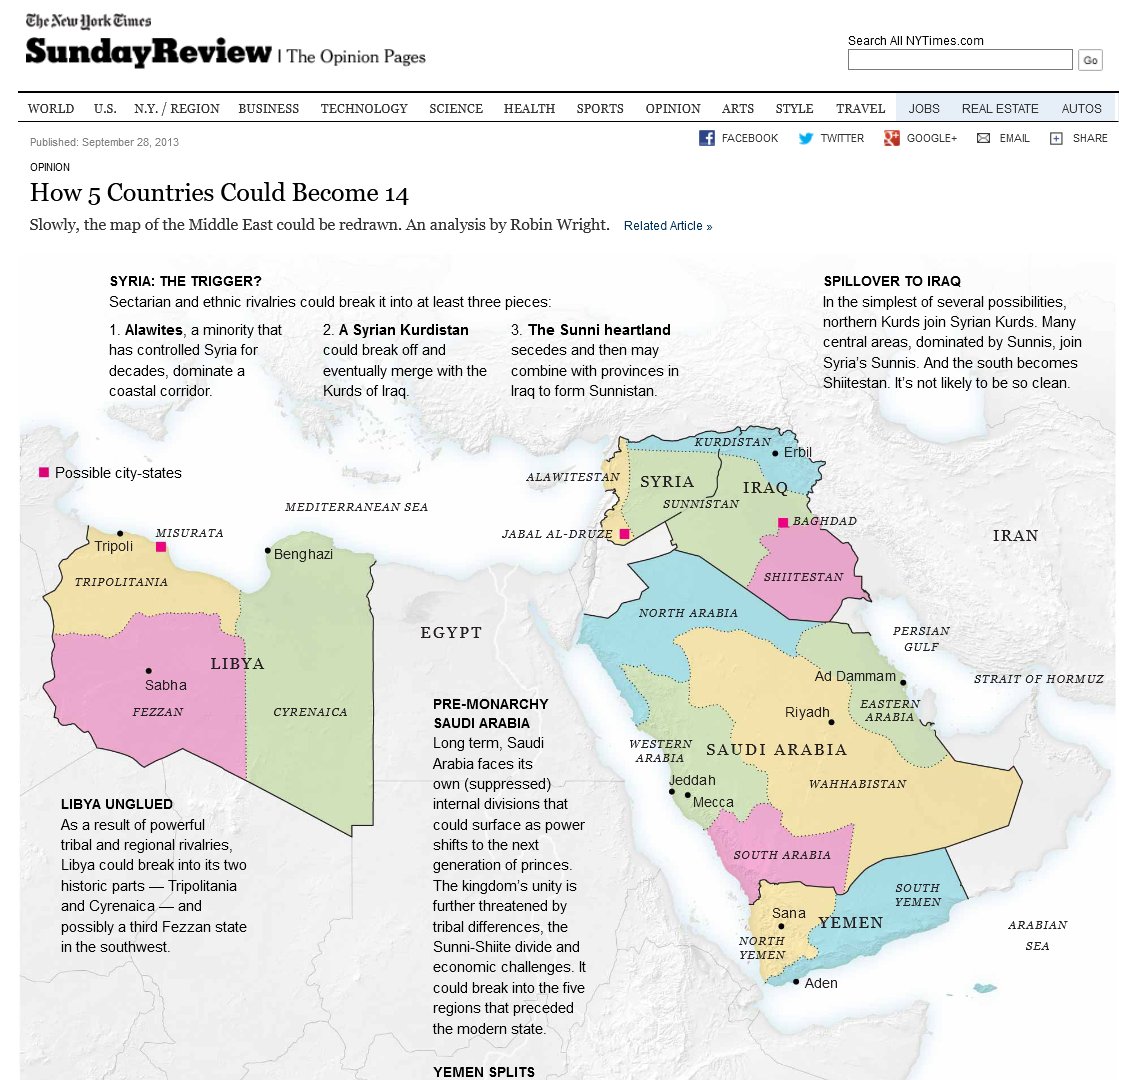 In addition to US neoconservatives fantasizing about carving up South Asia on ethnosectarian lines, the liberal imperialists at the New York Times have published maps proposing the same kind of neocolonial division of West Asia https://archive.nytimes.com/www.nytimes.com/interactive/2013/09/29/sunday-review/how-5-countries-could-become-14.html